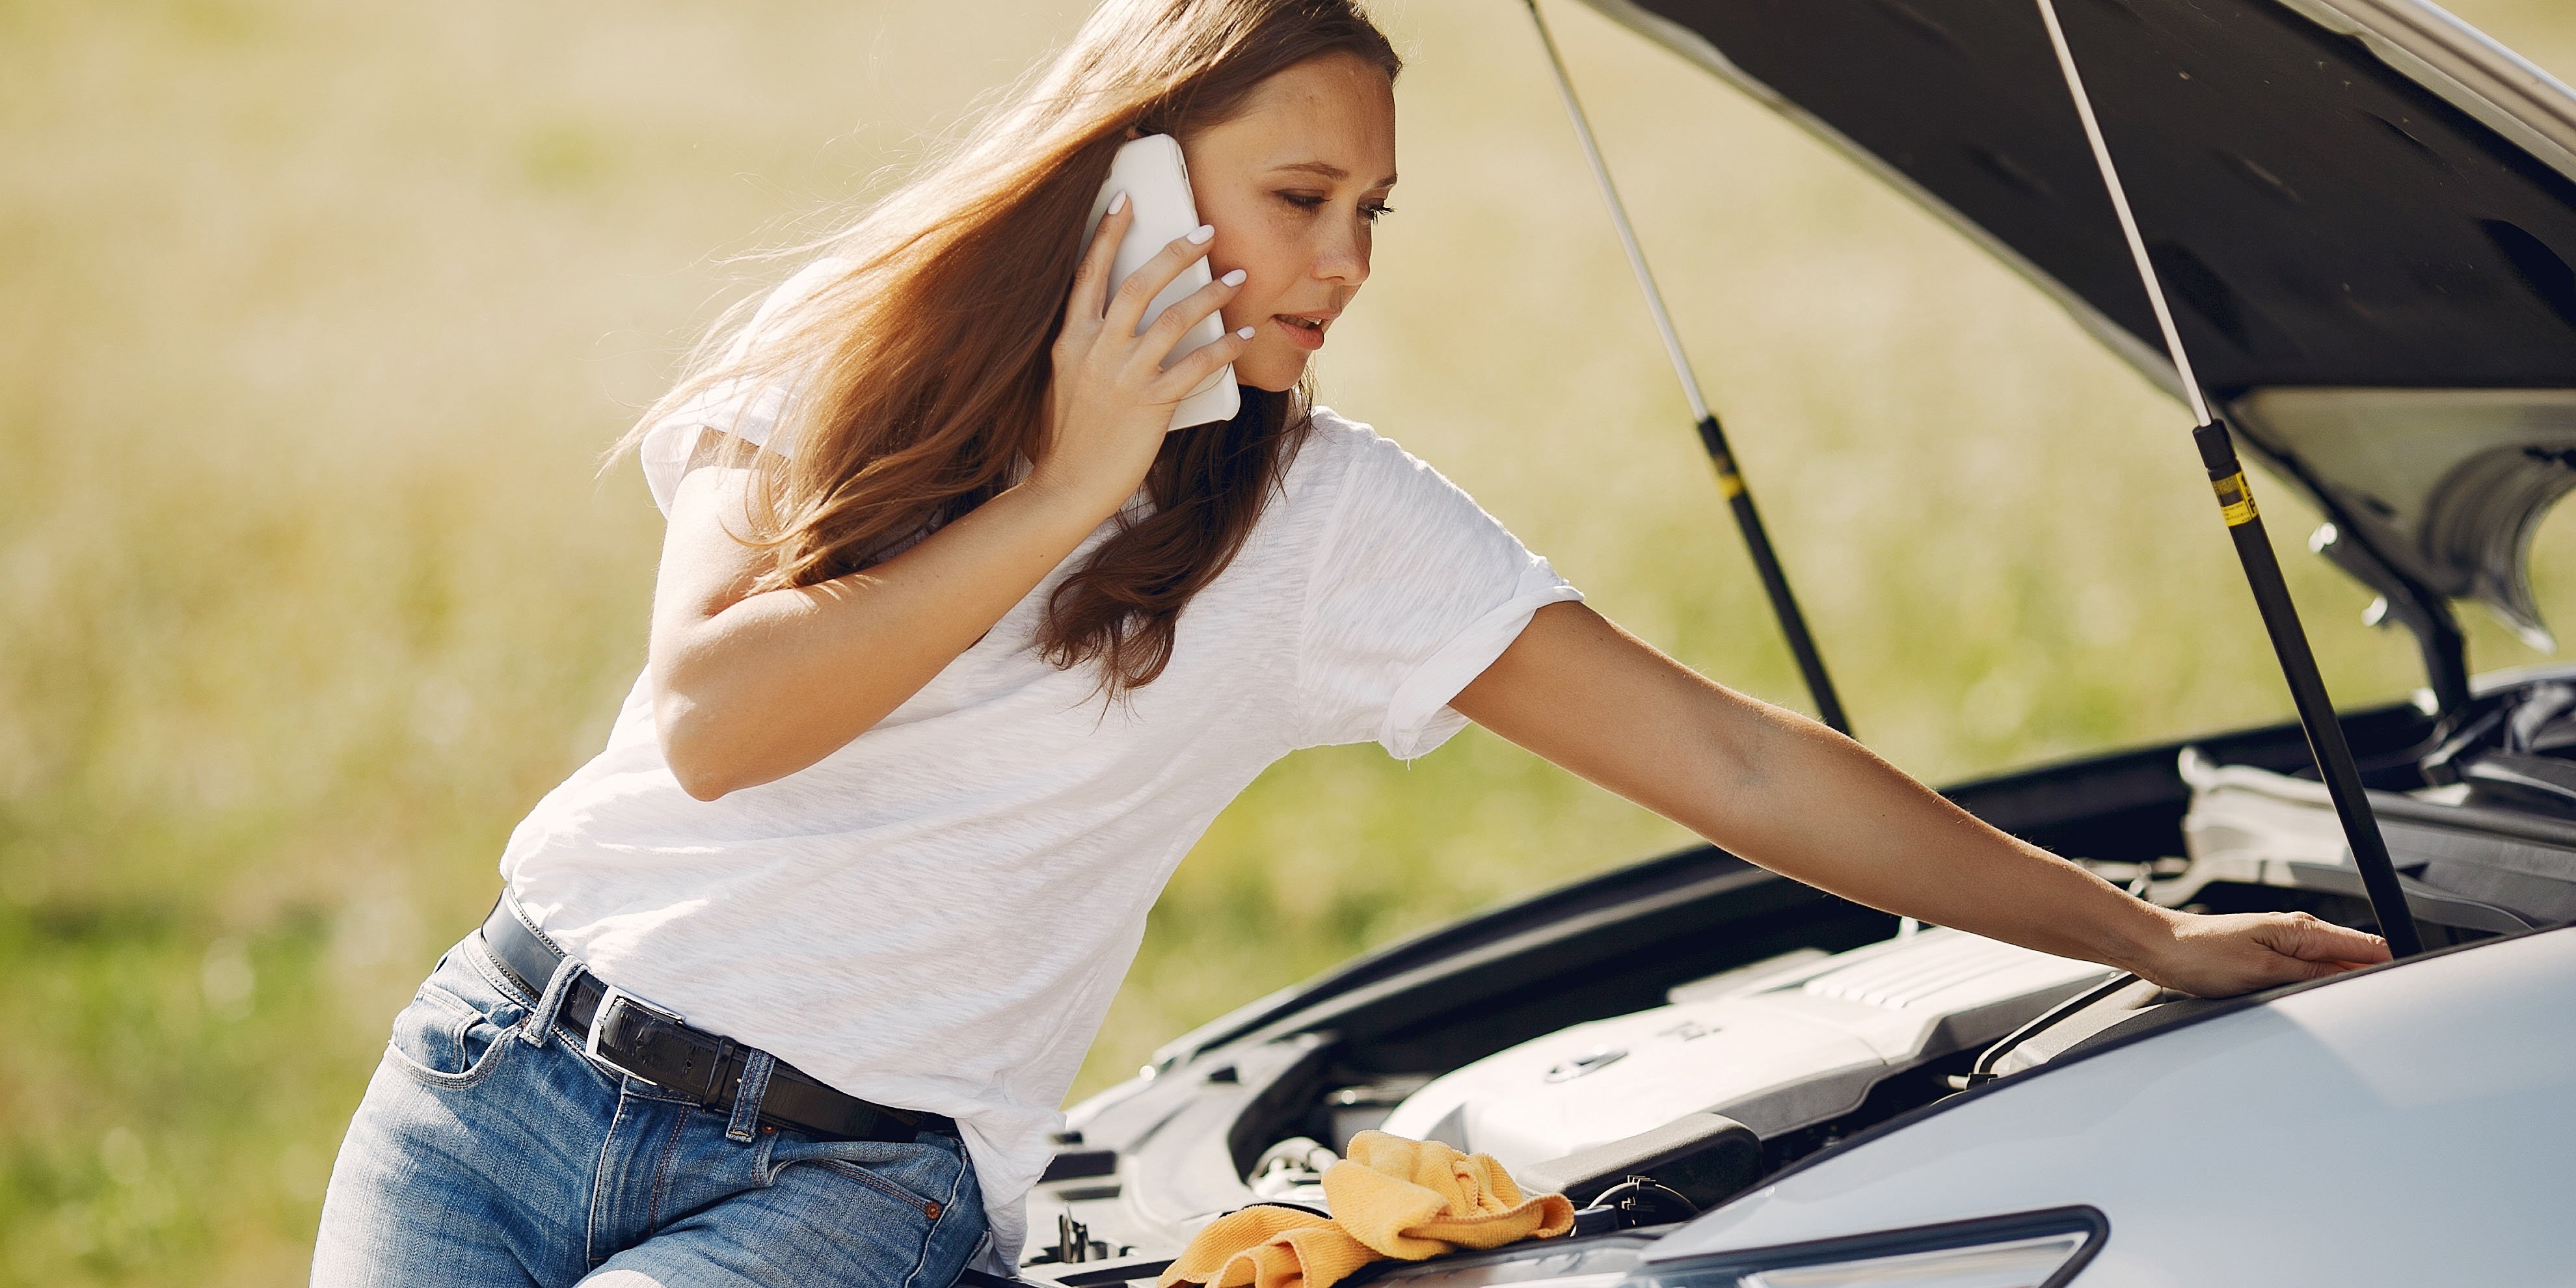 College student with hands on hips, frowning as she looks at her dented car